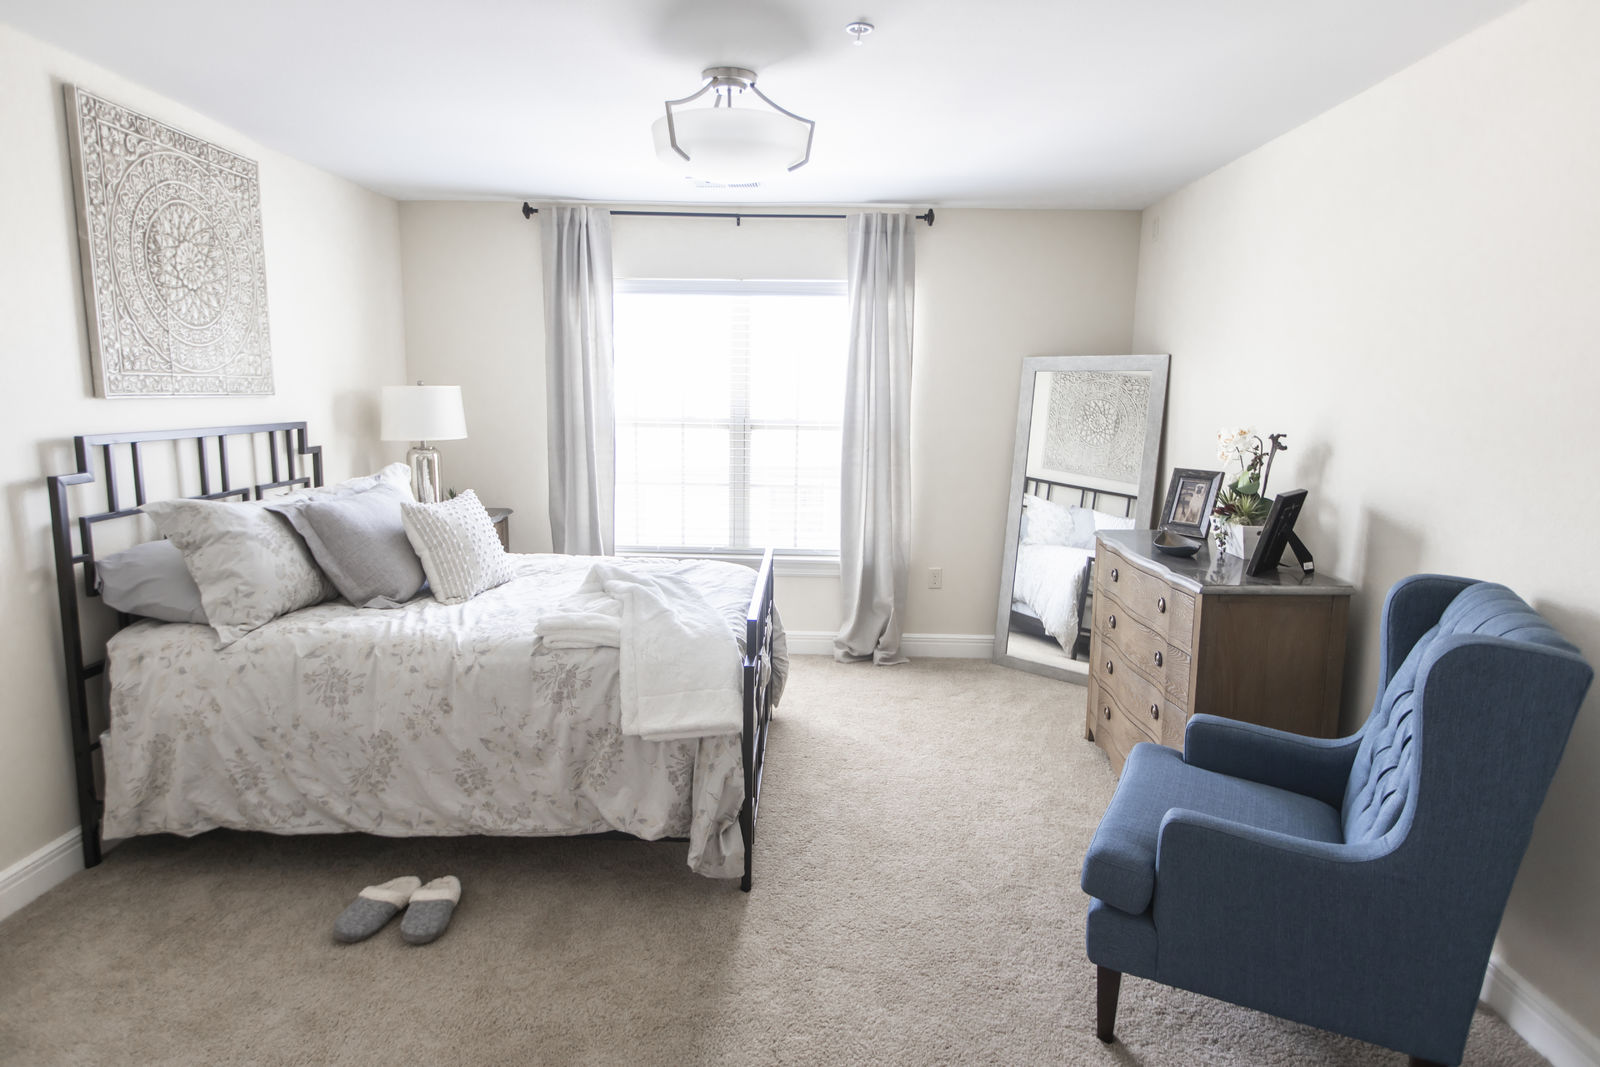 Sample bedroom at The Parkway Senior Living in Blue Springs, MO